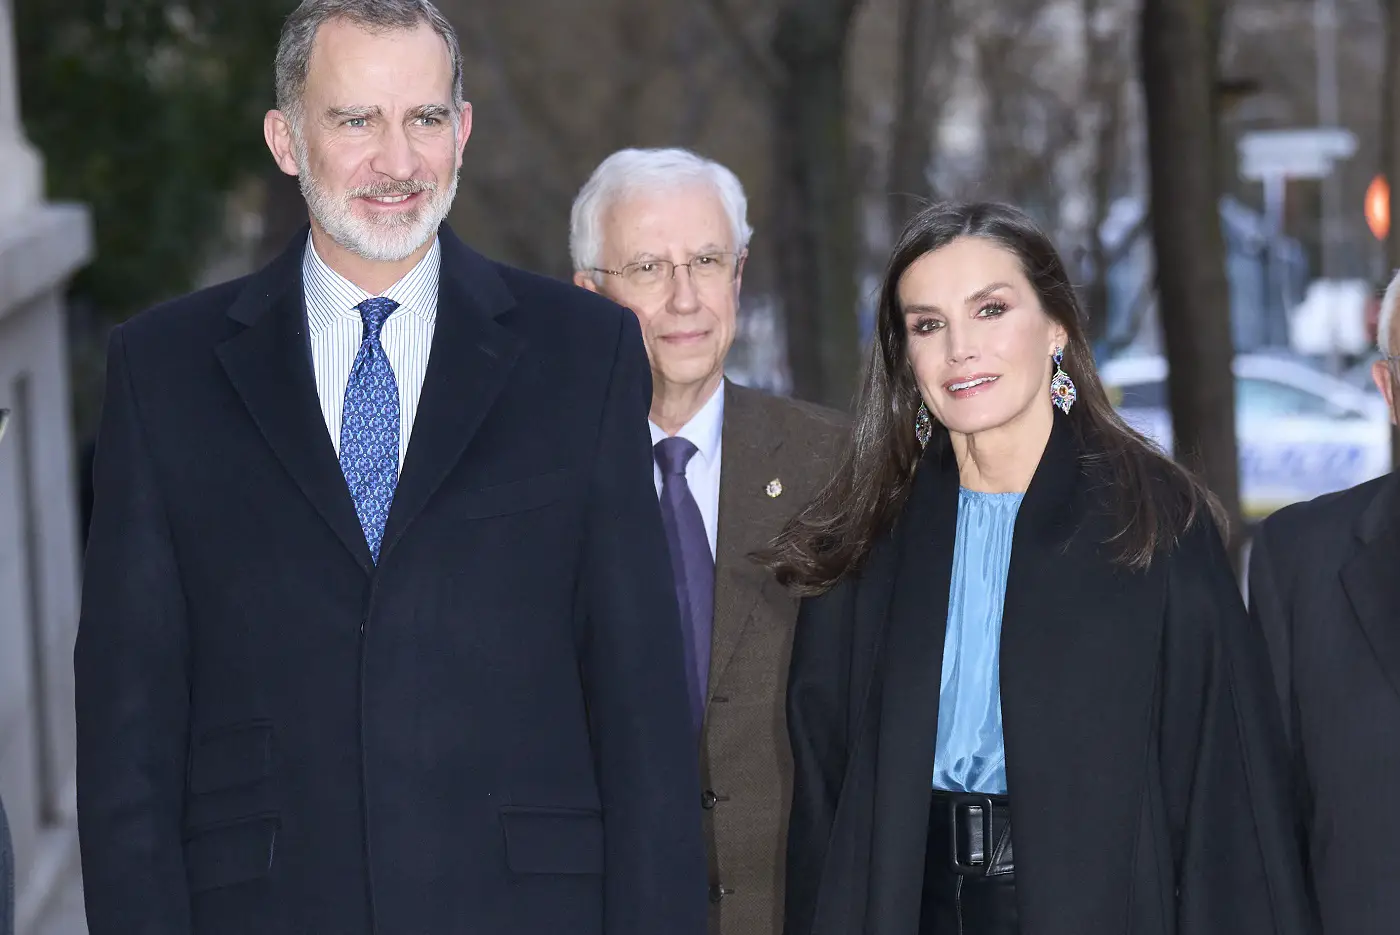 King Felipe and Queen Letizia attended Royal Spanish Academy Meeting in Madrid